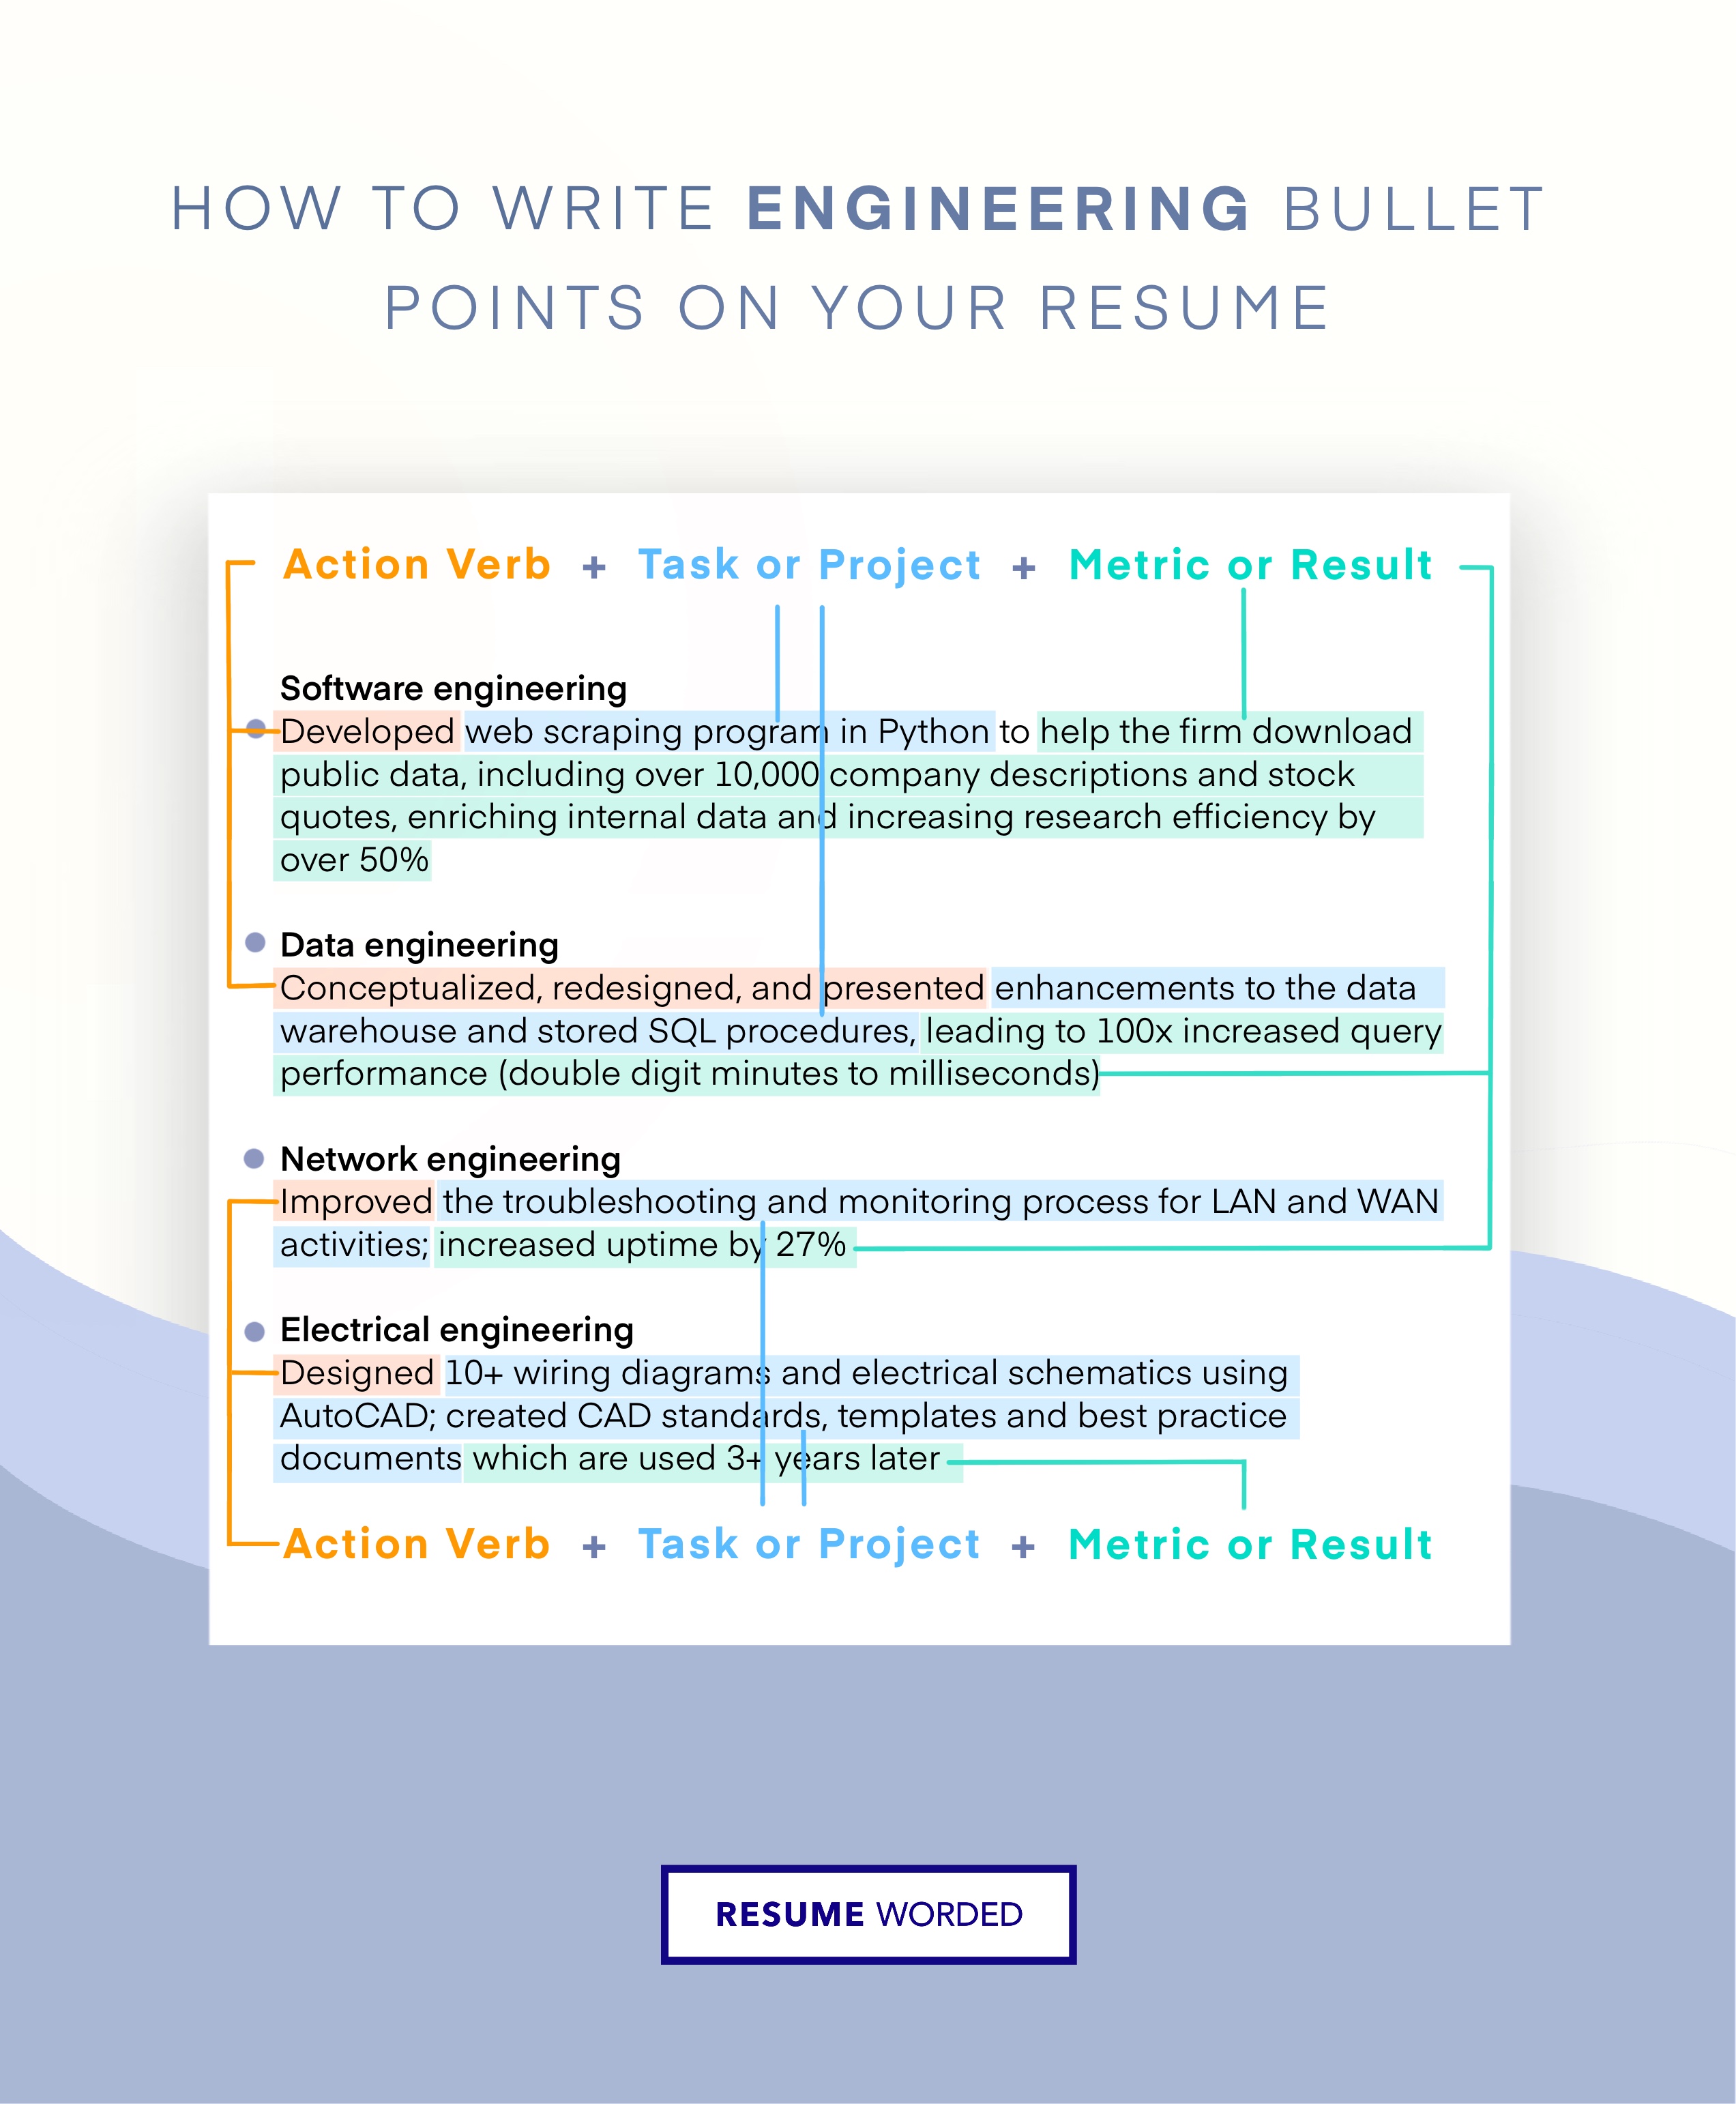 Showcase your achievements in past engineering projects with metrics. - Development and Planning Engineer Resume